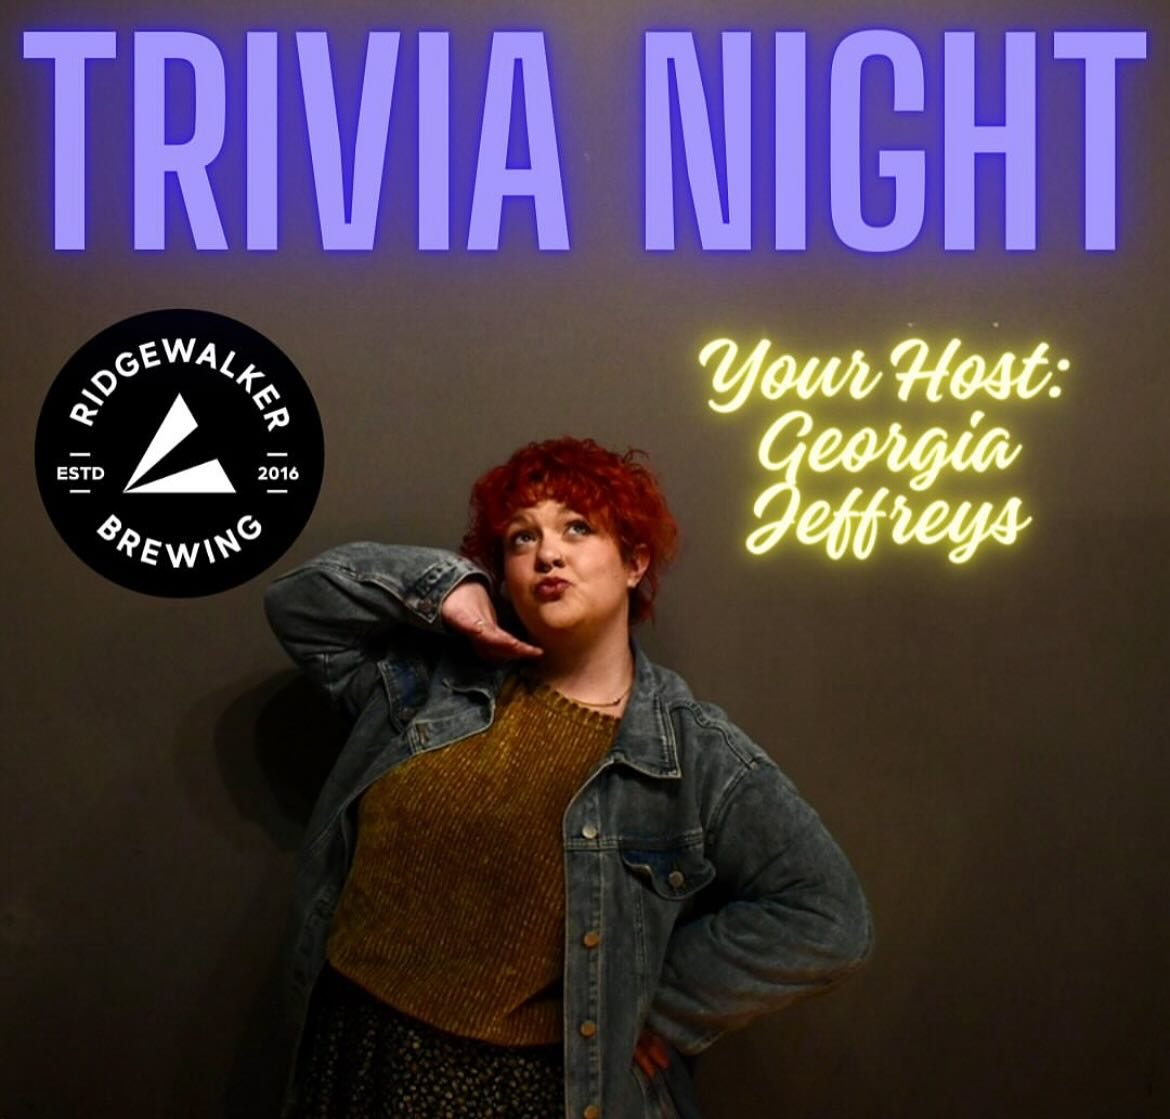 Join us for Trivia tonight from 6pm-8pm

Our host, Georgia Jeffreys, will take you on a challenging adventure to test your knowledge amongst many categories.

All ages are welcome, form a team and win prizes!

THE DETAILS:

-4 Rounds with 10 unique q